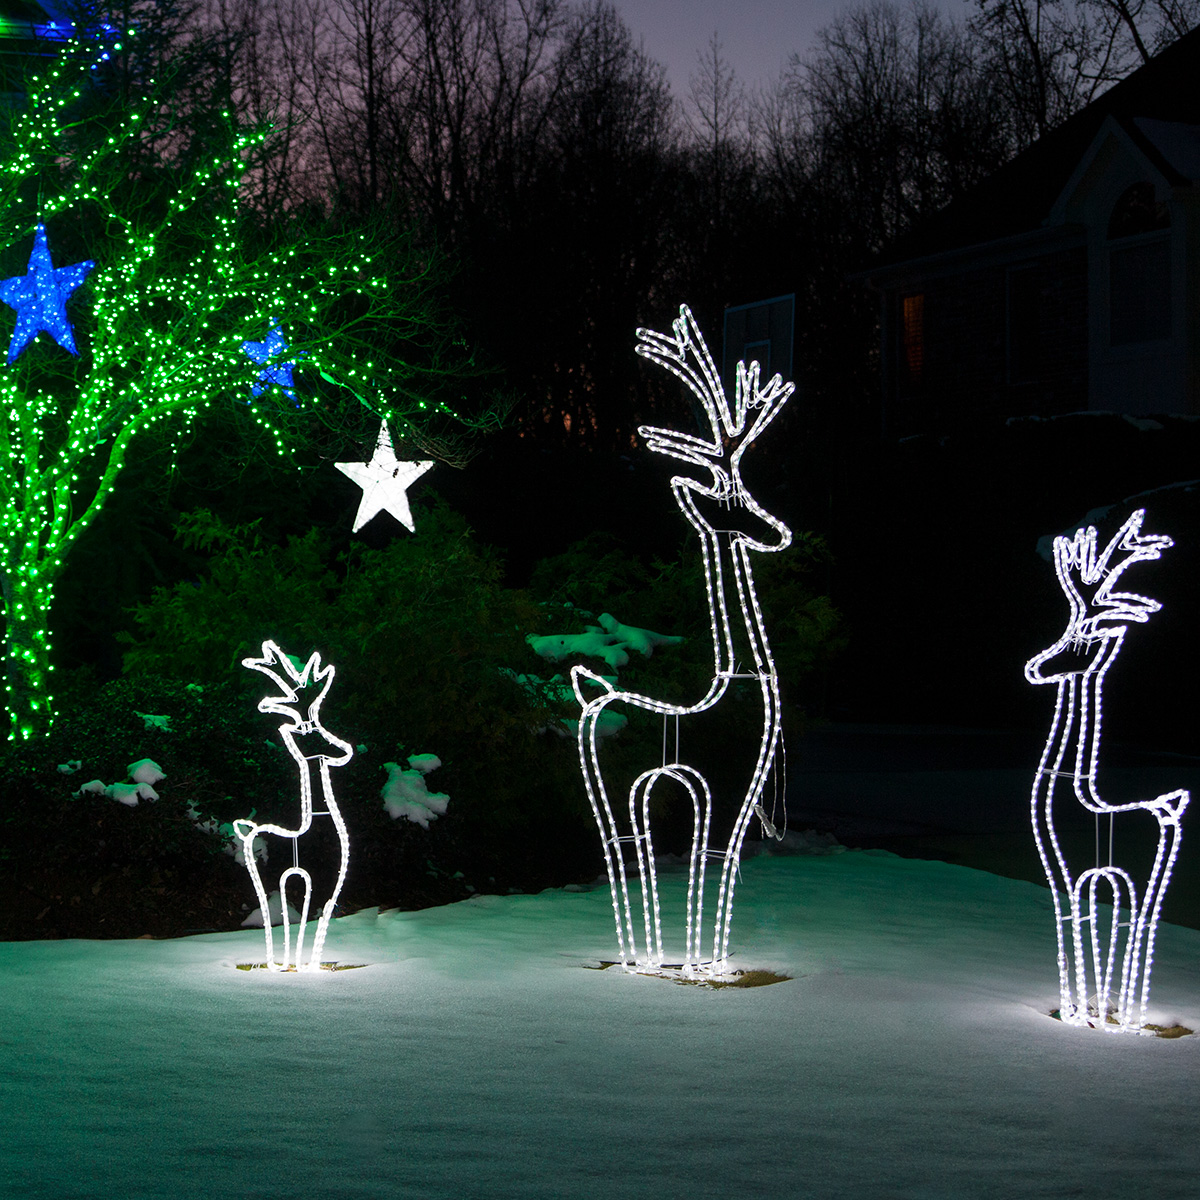 4 Ft Tall, 324 Lights Wintergreen Lighting 3D Cool White LED Christmas Reindeer Yard Decorations 